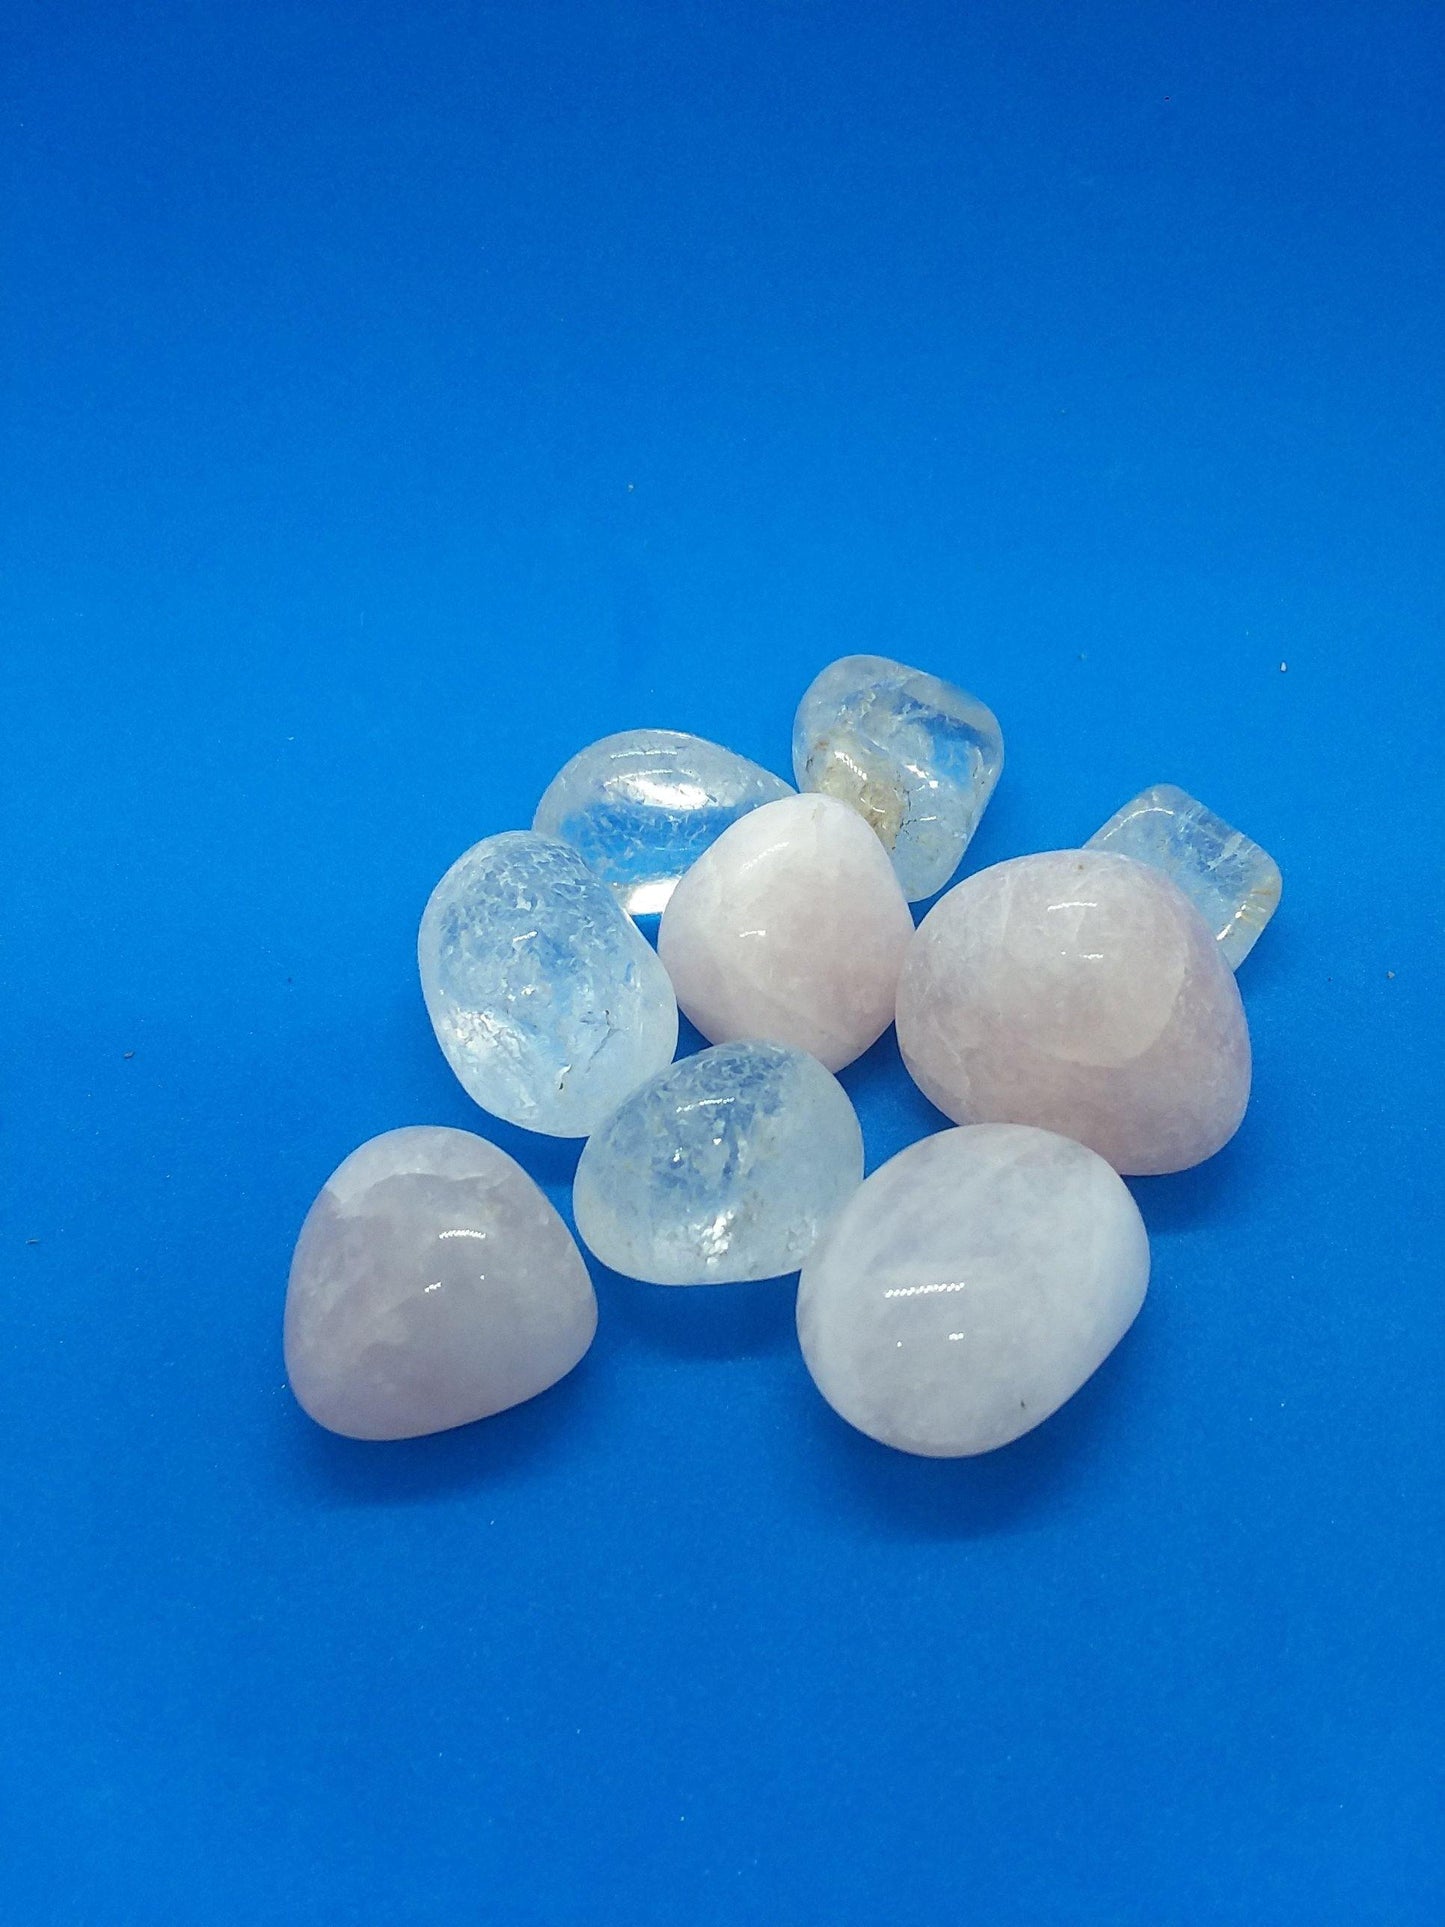  Clear Quartz Rough Stone -  available at Amazing Creations Products . Grab yours for $3.00 today!